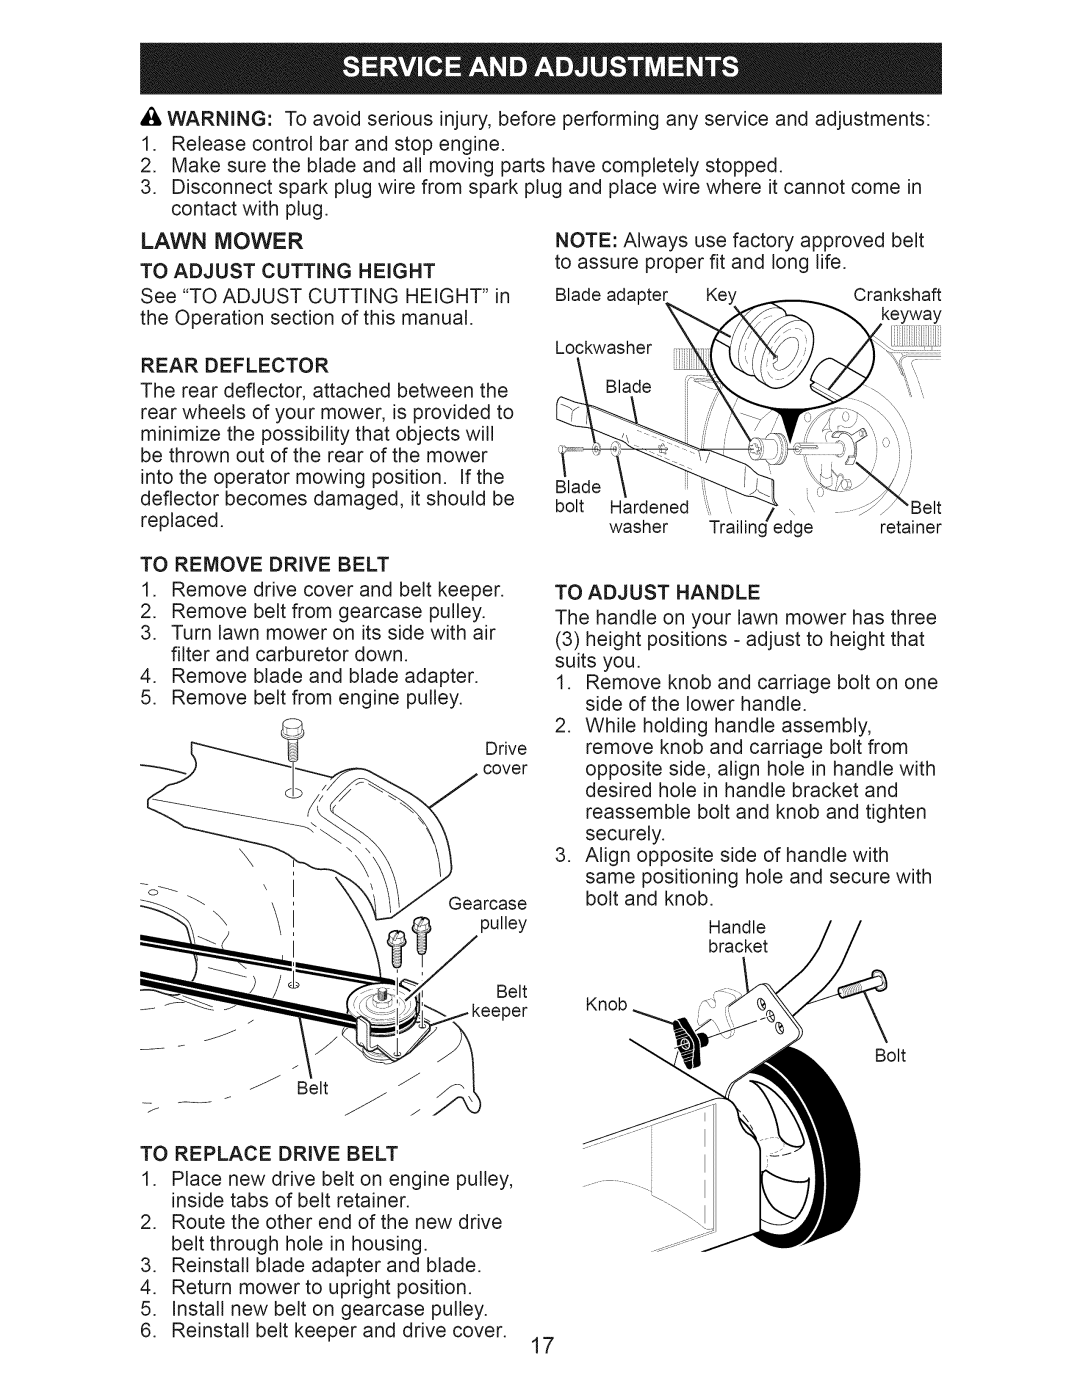 Craftsman 917.374060 owner manual Lawn Mower To Adjust Cutting Height 